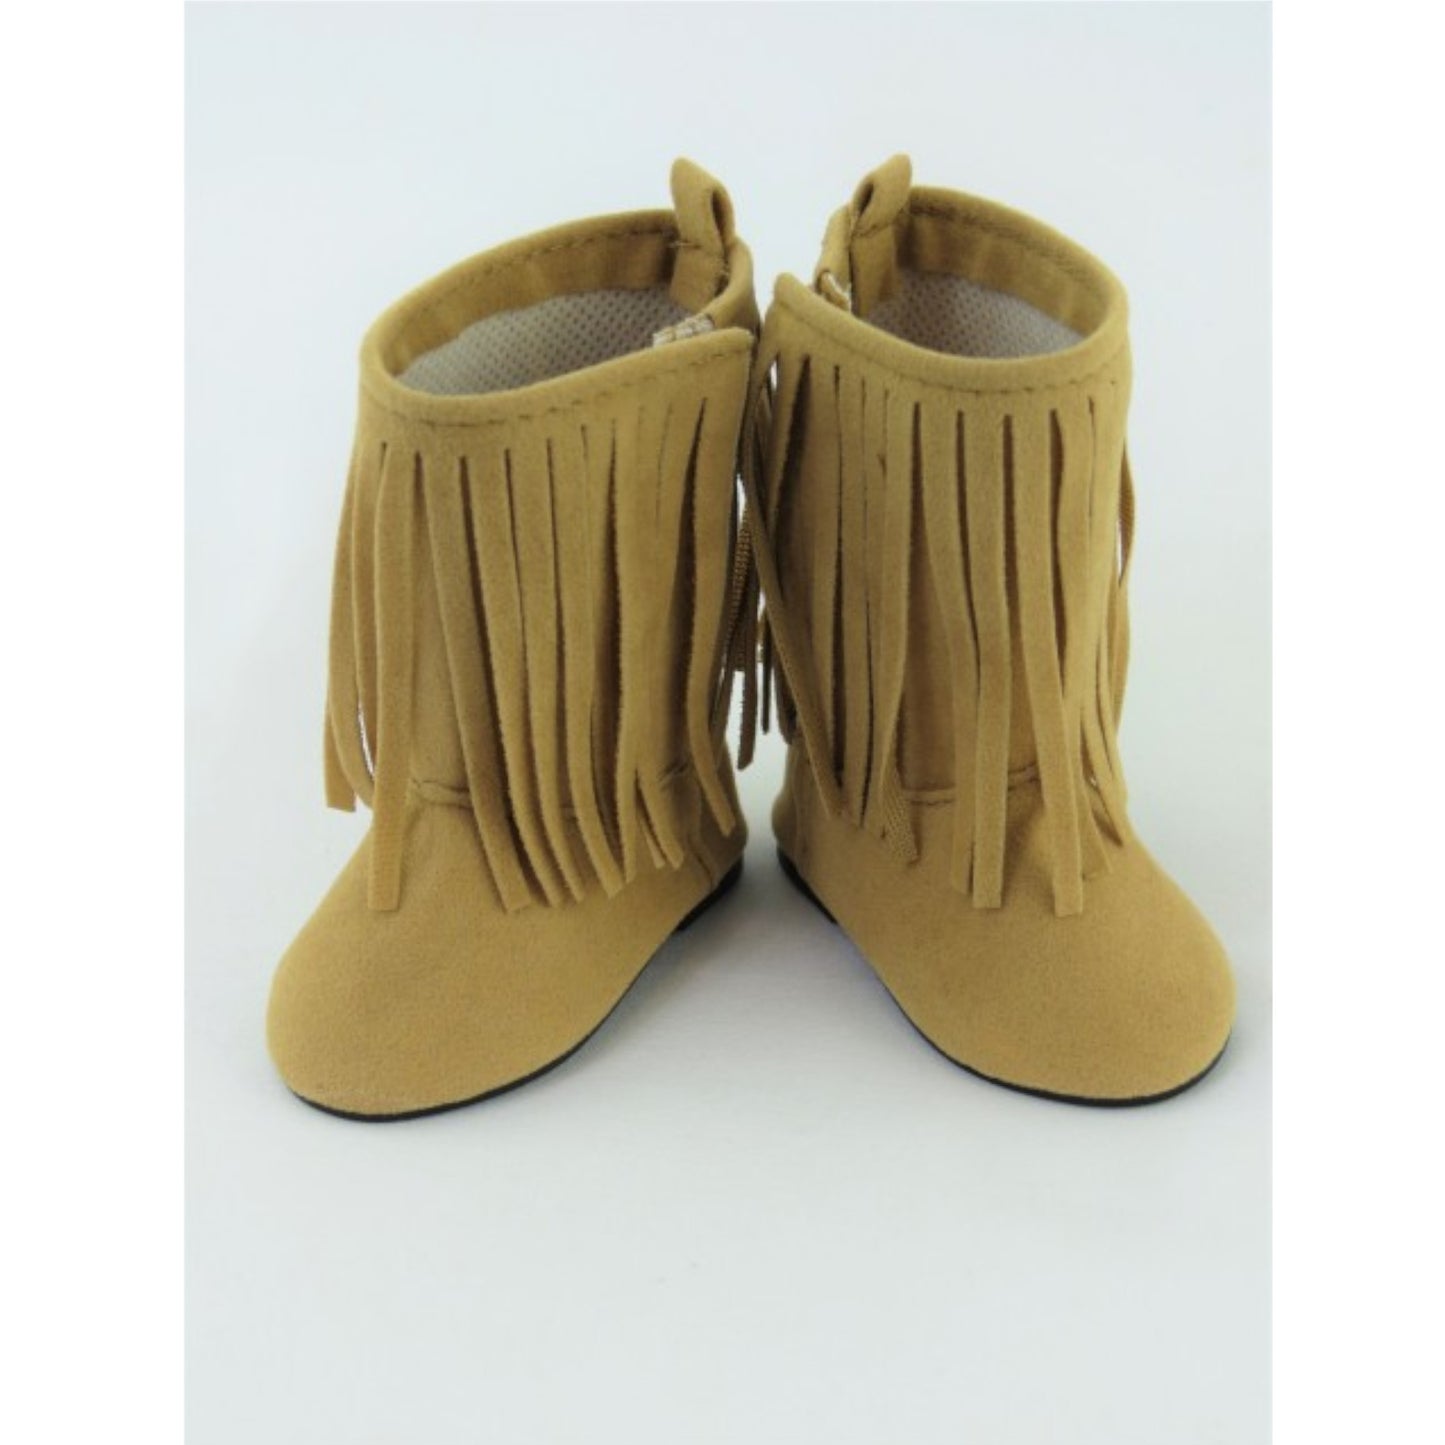 Tan Fringe Boots for 18-inch dolls